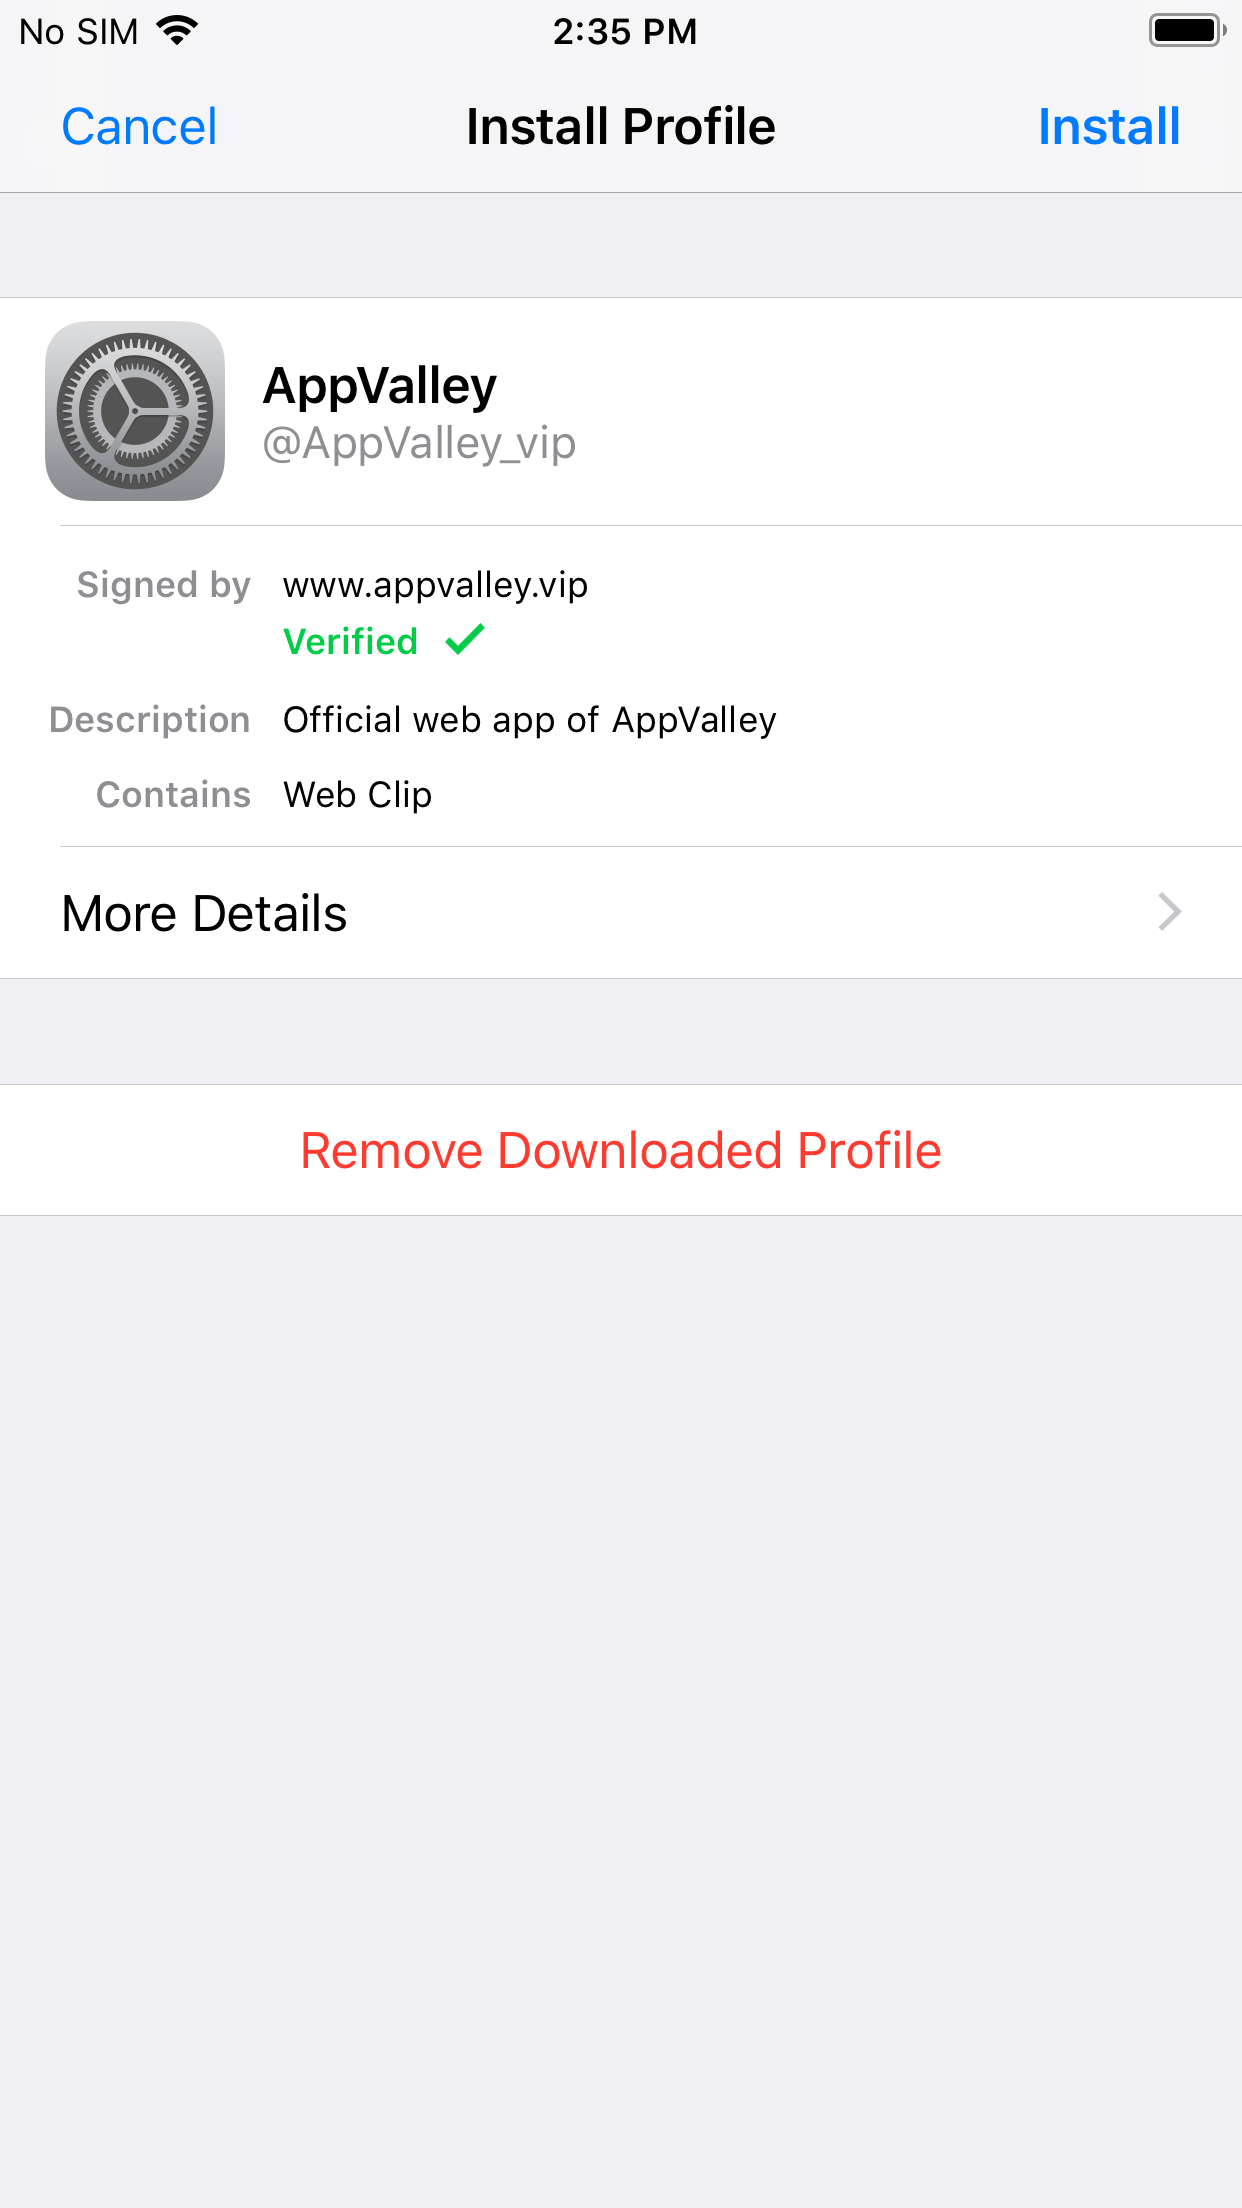 install appvalley